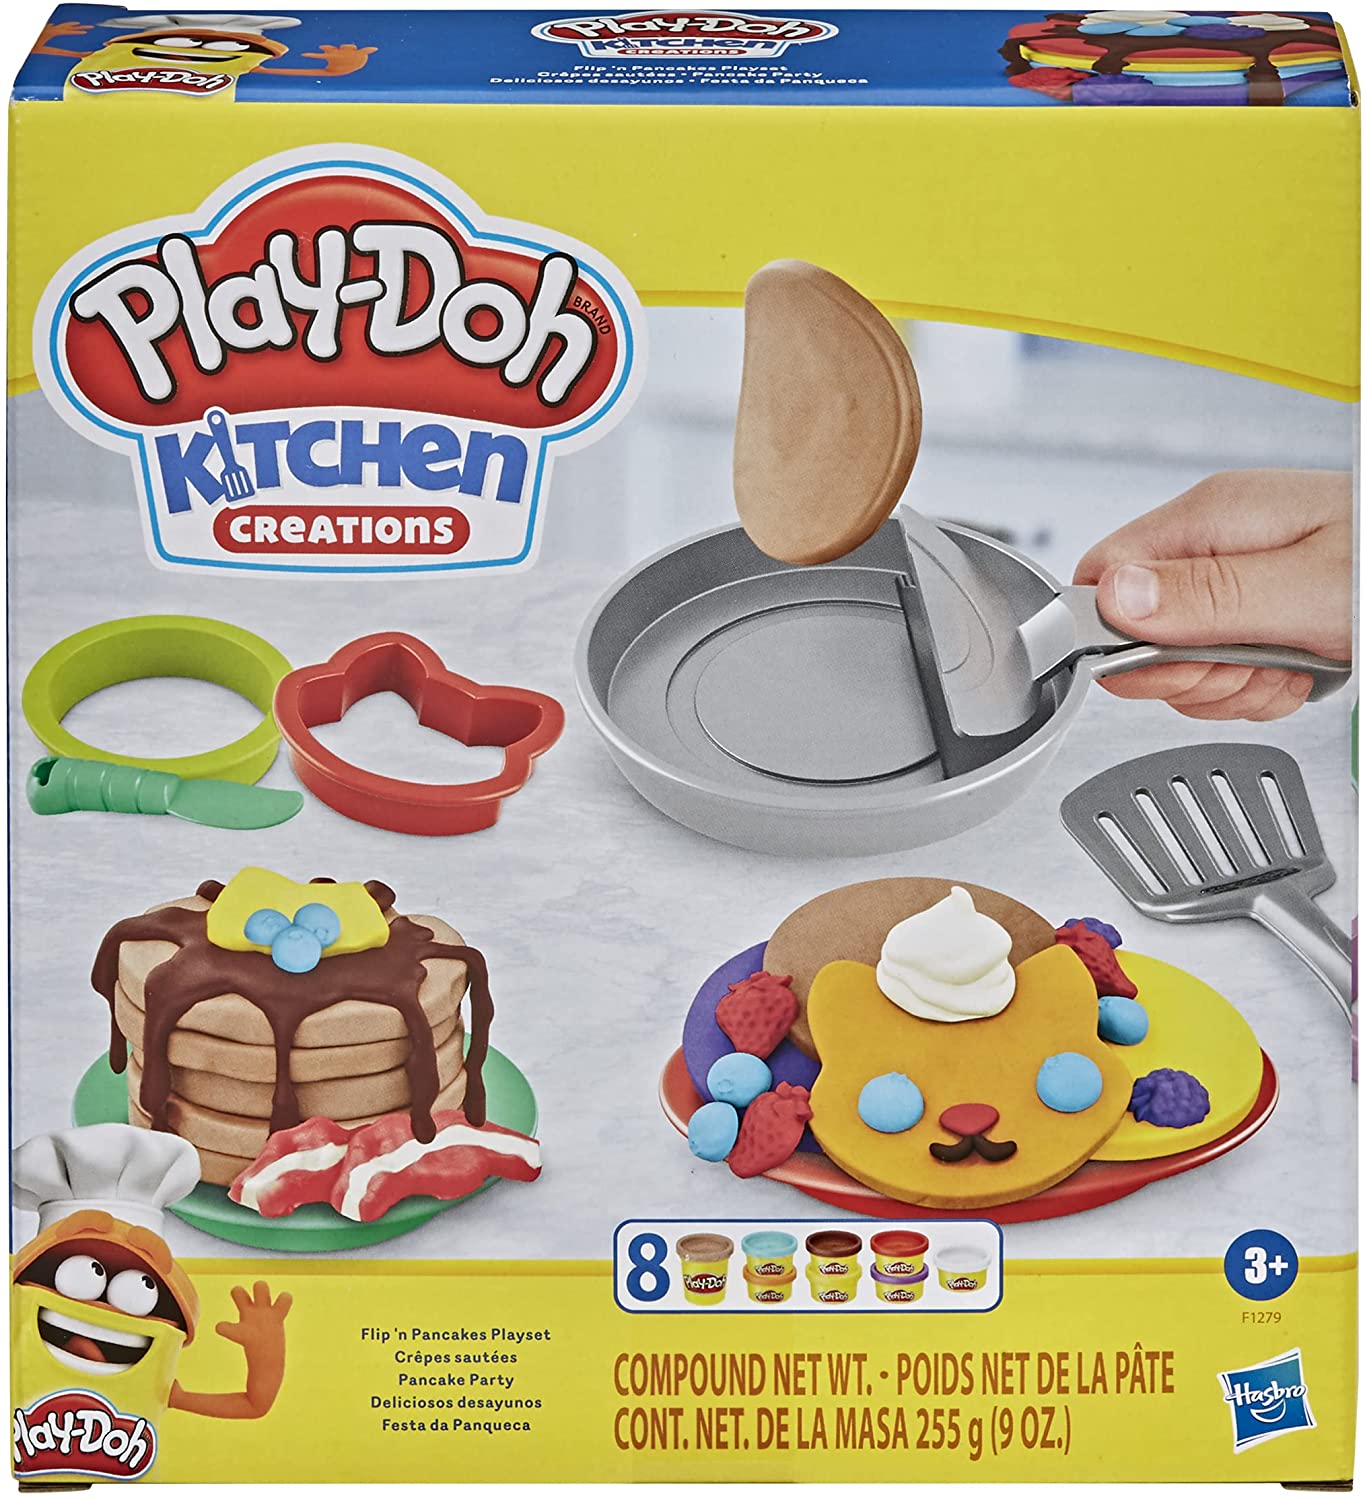 Modelling Dough 6 Jungle Animal Cutters Smart Doh For Play Baking Arts Crafts 